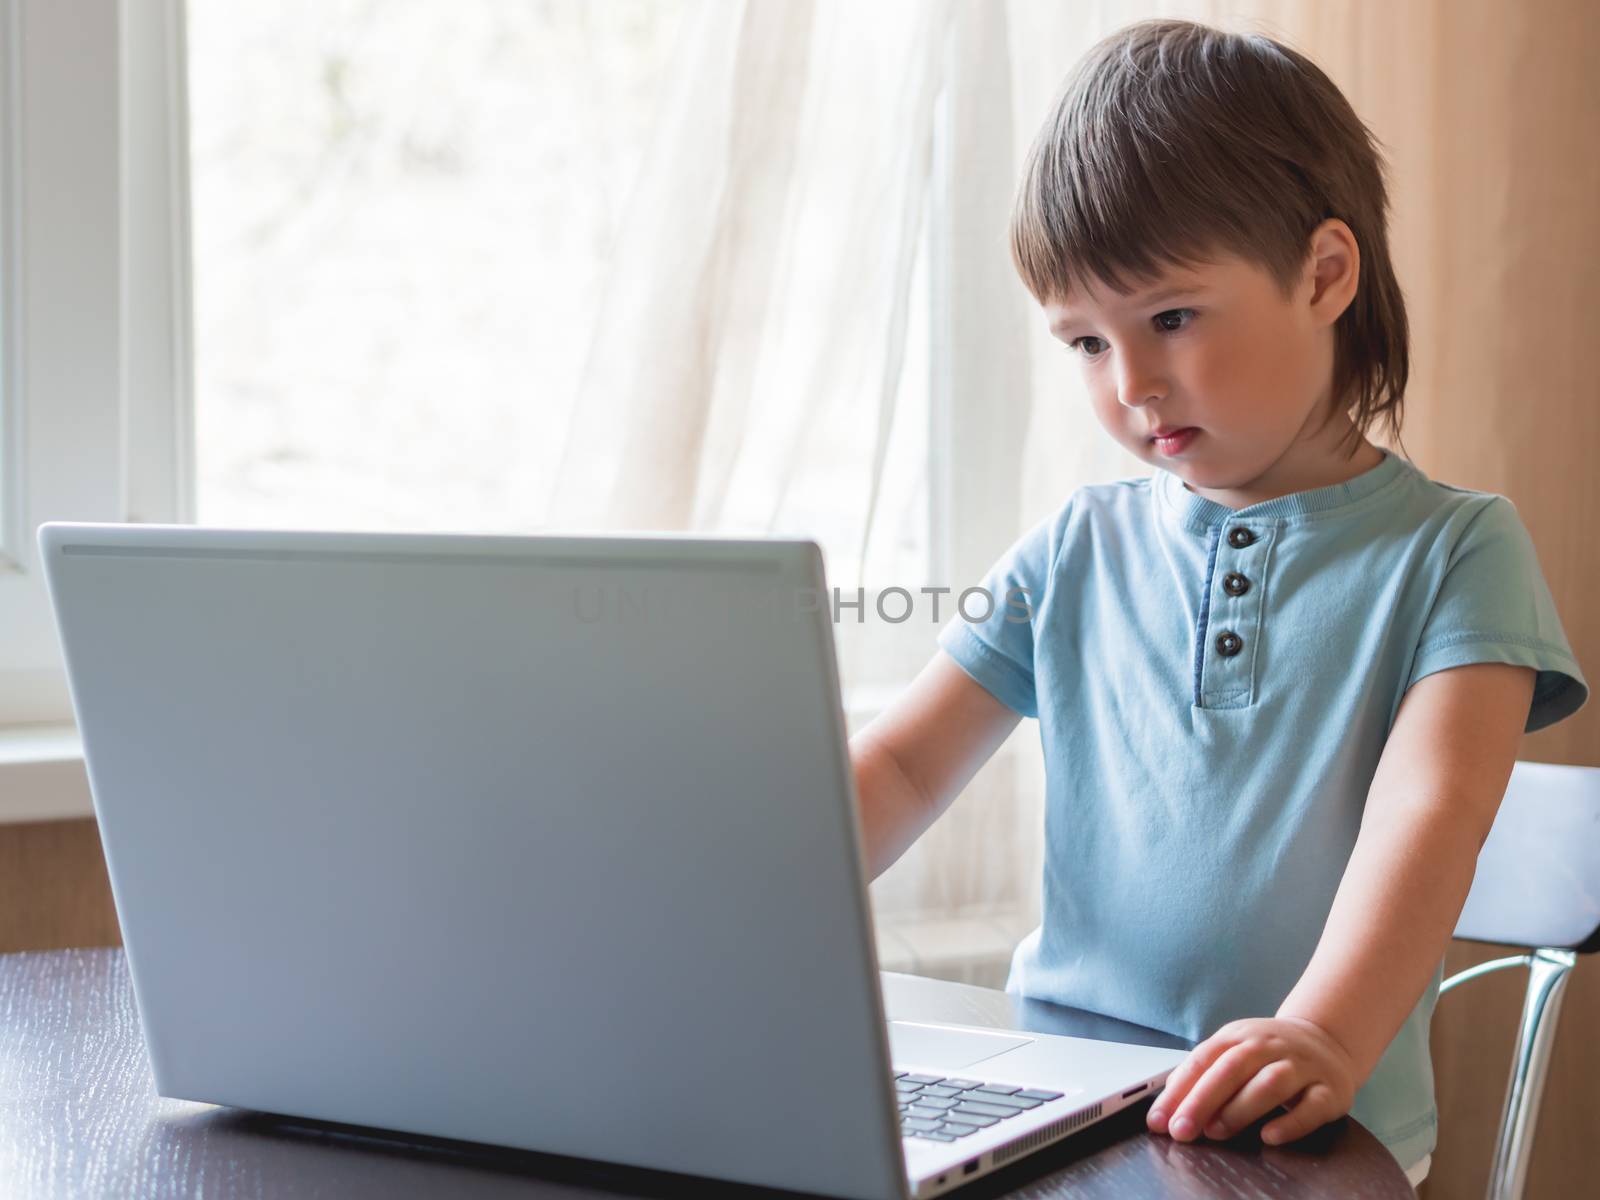 Curious toddler boy explores the laptop and presses buttons on computer keyboard.